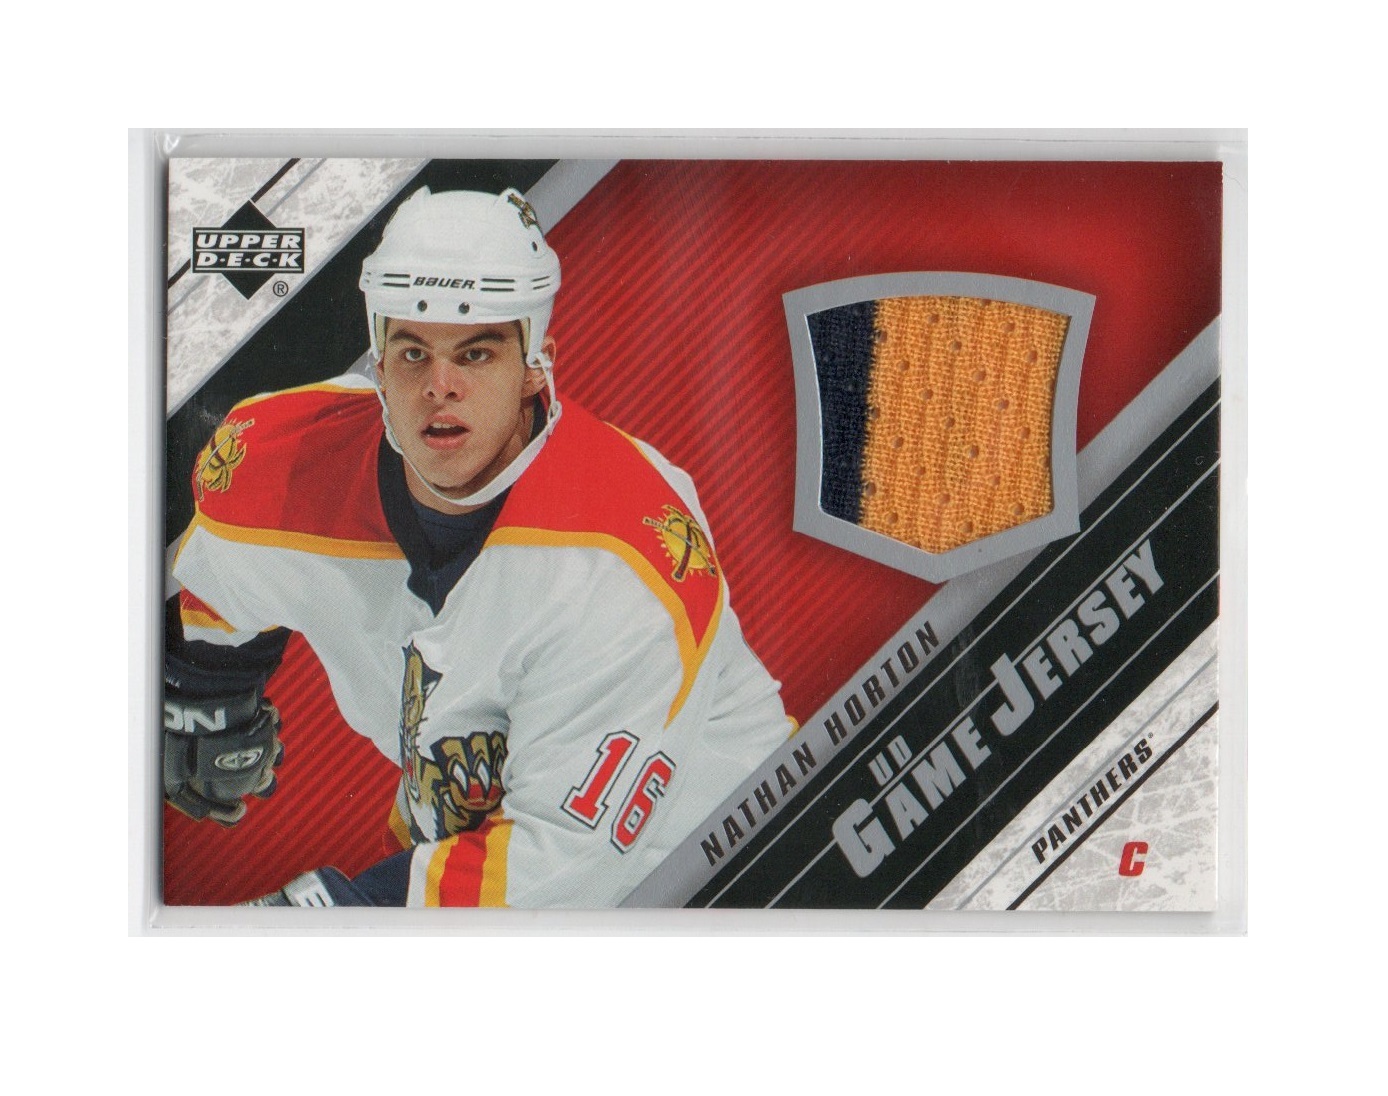 2005-06 Upper Deck Jerseys #JNH Nathan Horton (25-X235-GAMEUSED-NHLPANTHERS)